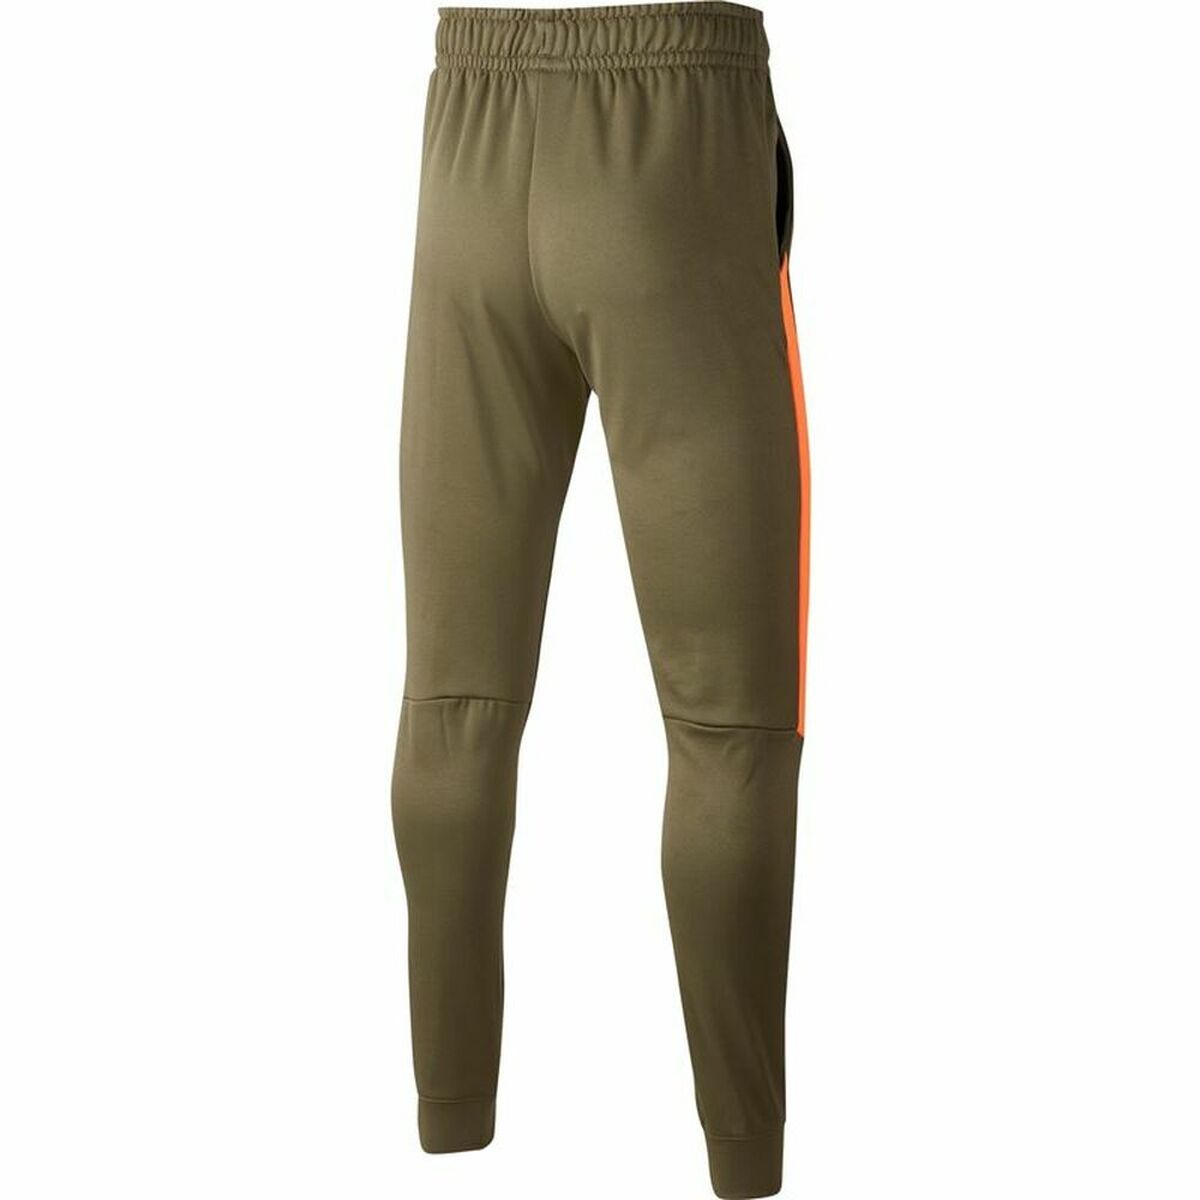 Children's Tracksuit Bottoms Nike Dri-FIT Therma Olive Boys